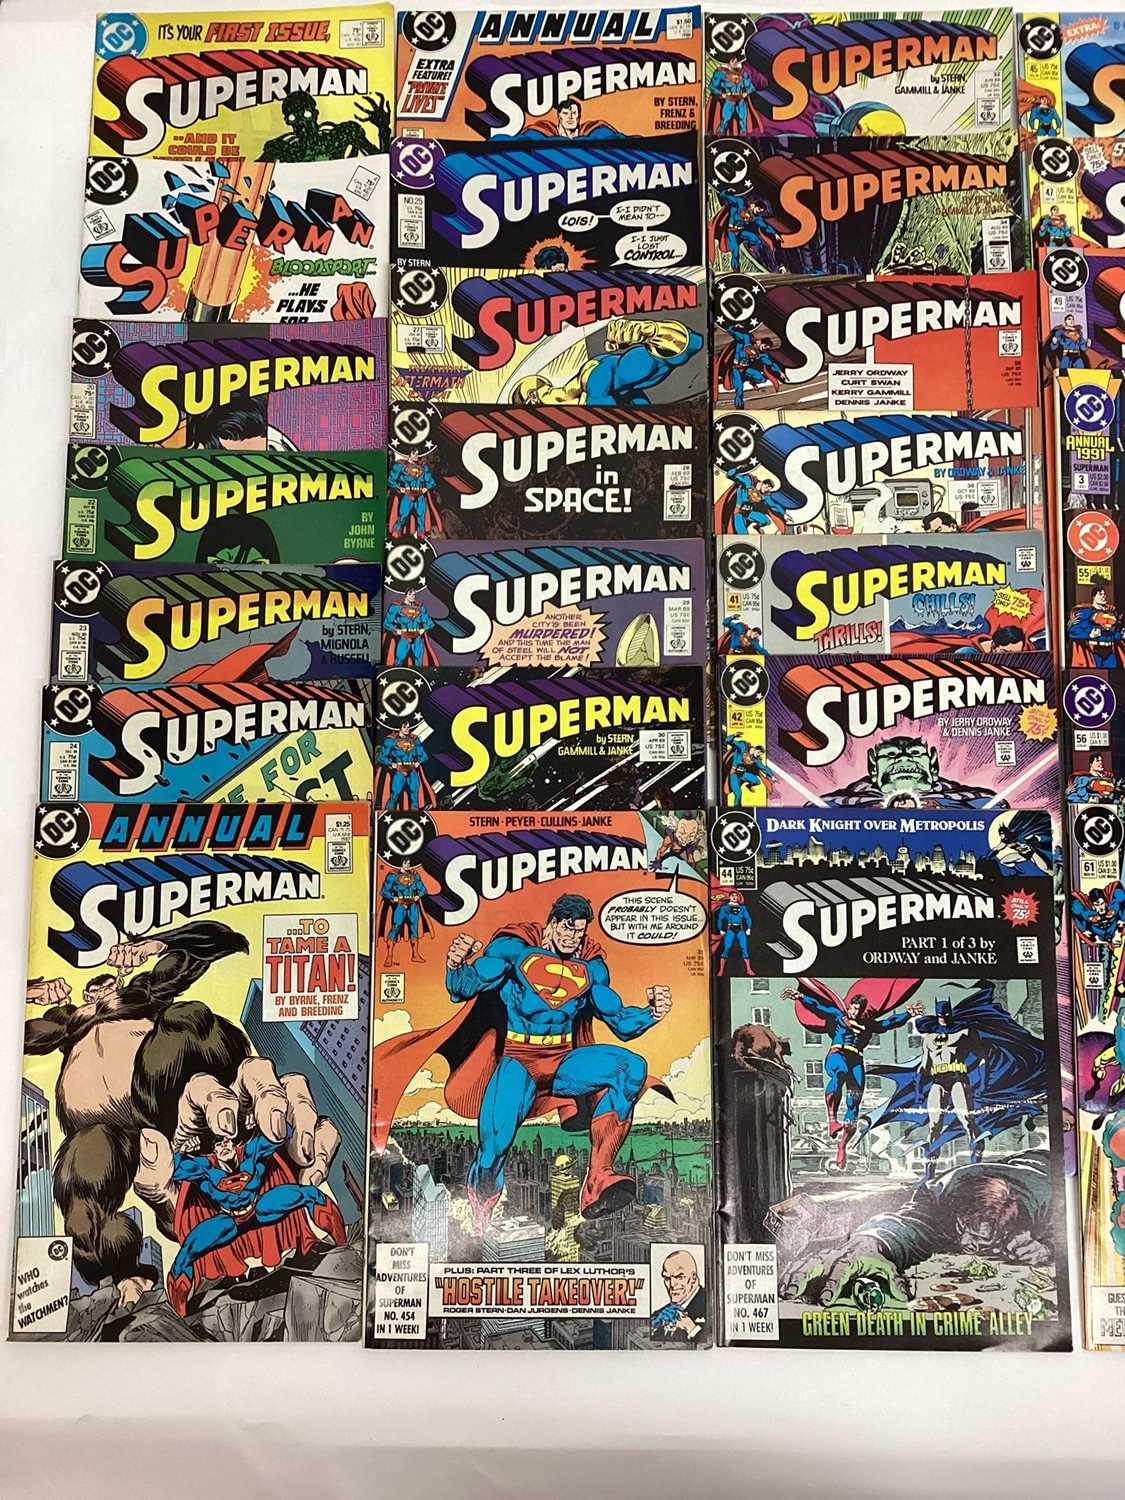 Large quantity of 1980's and 90's DC Comics, Superman to include #1, #4 1st appearance of Bloodsport - Image 2 of 11